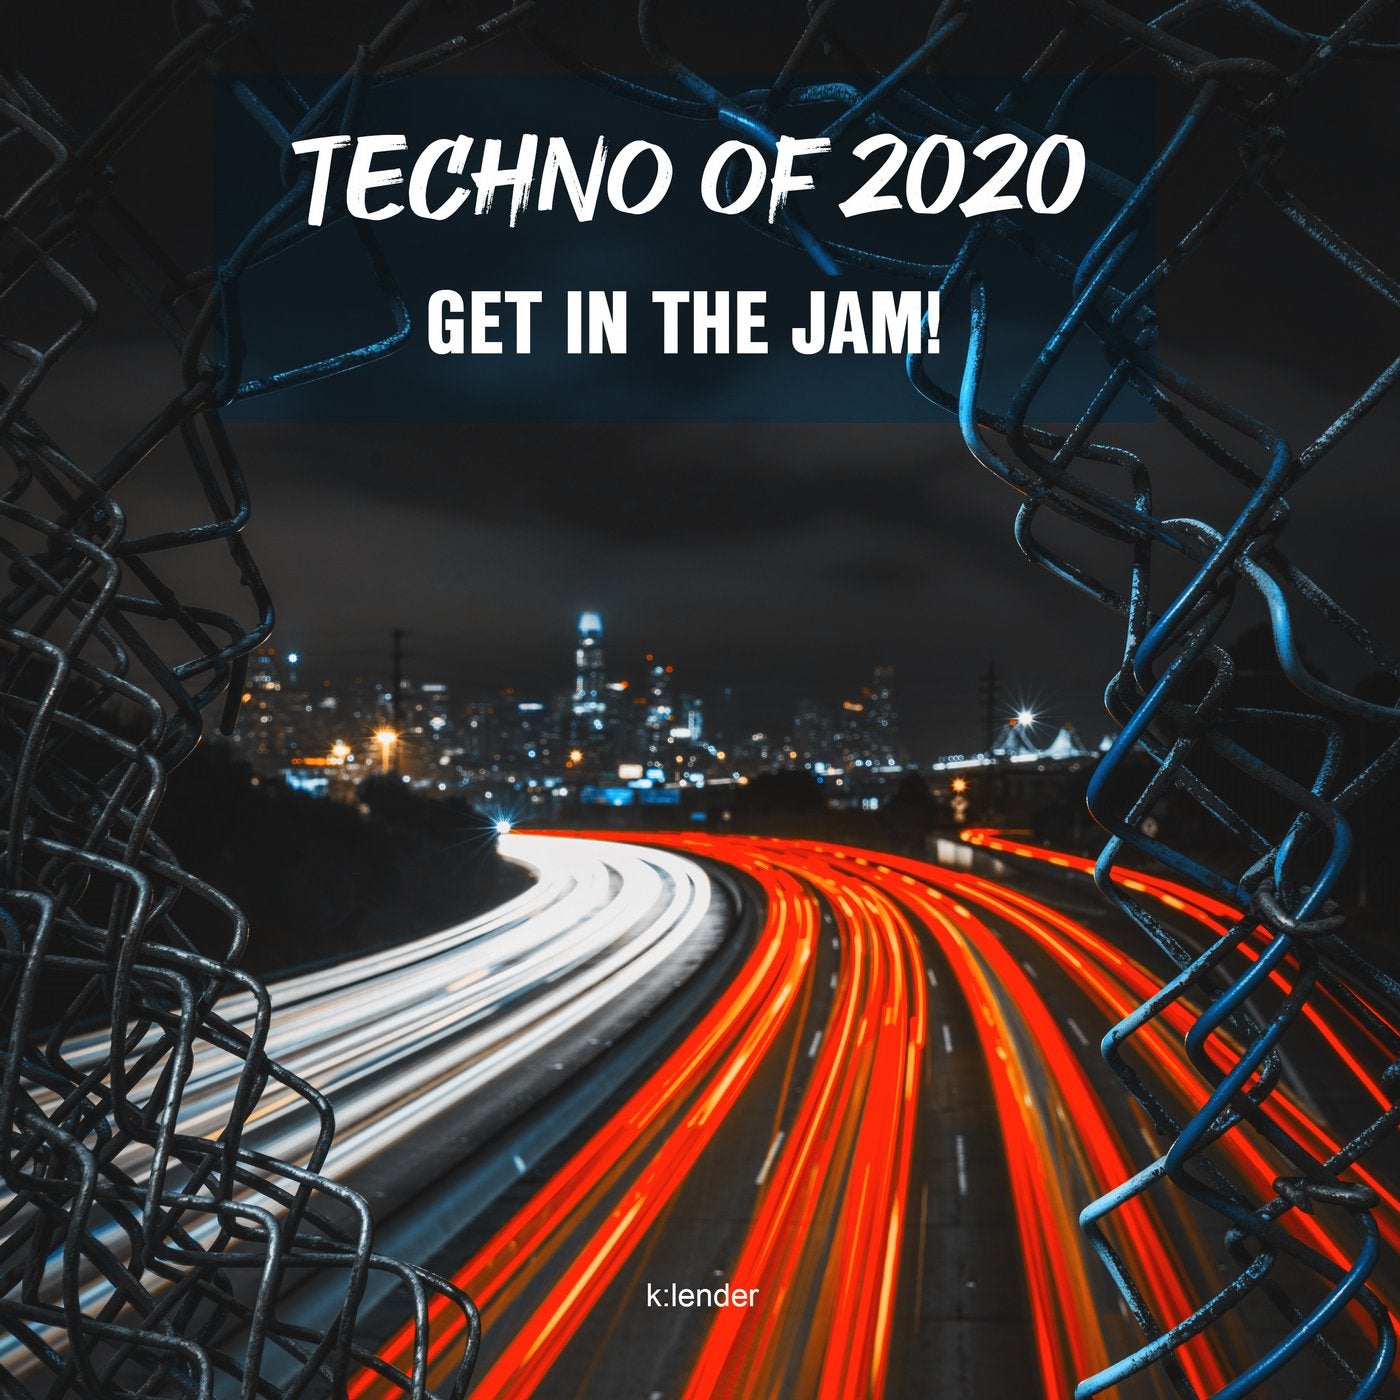 Techno of 2020 Get in the Jam!